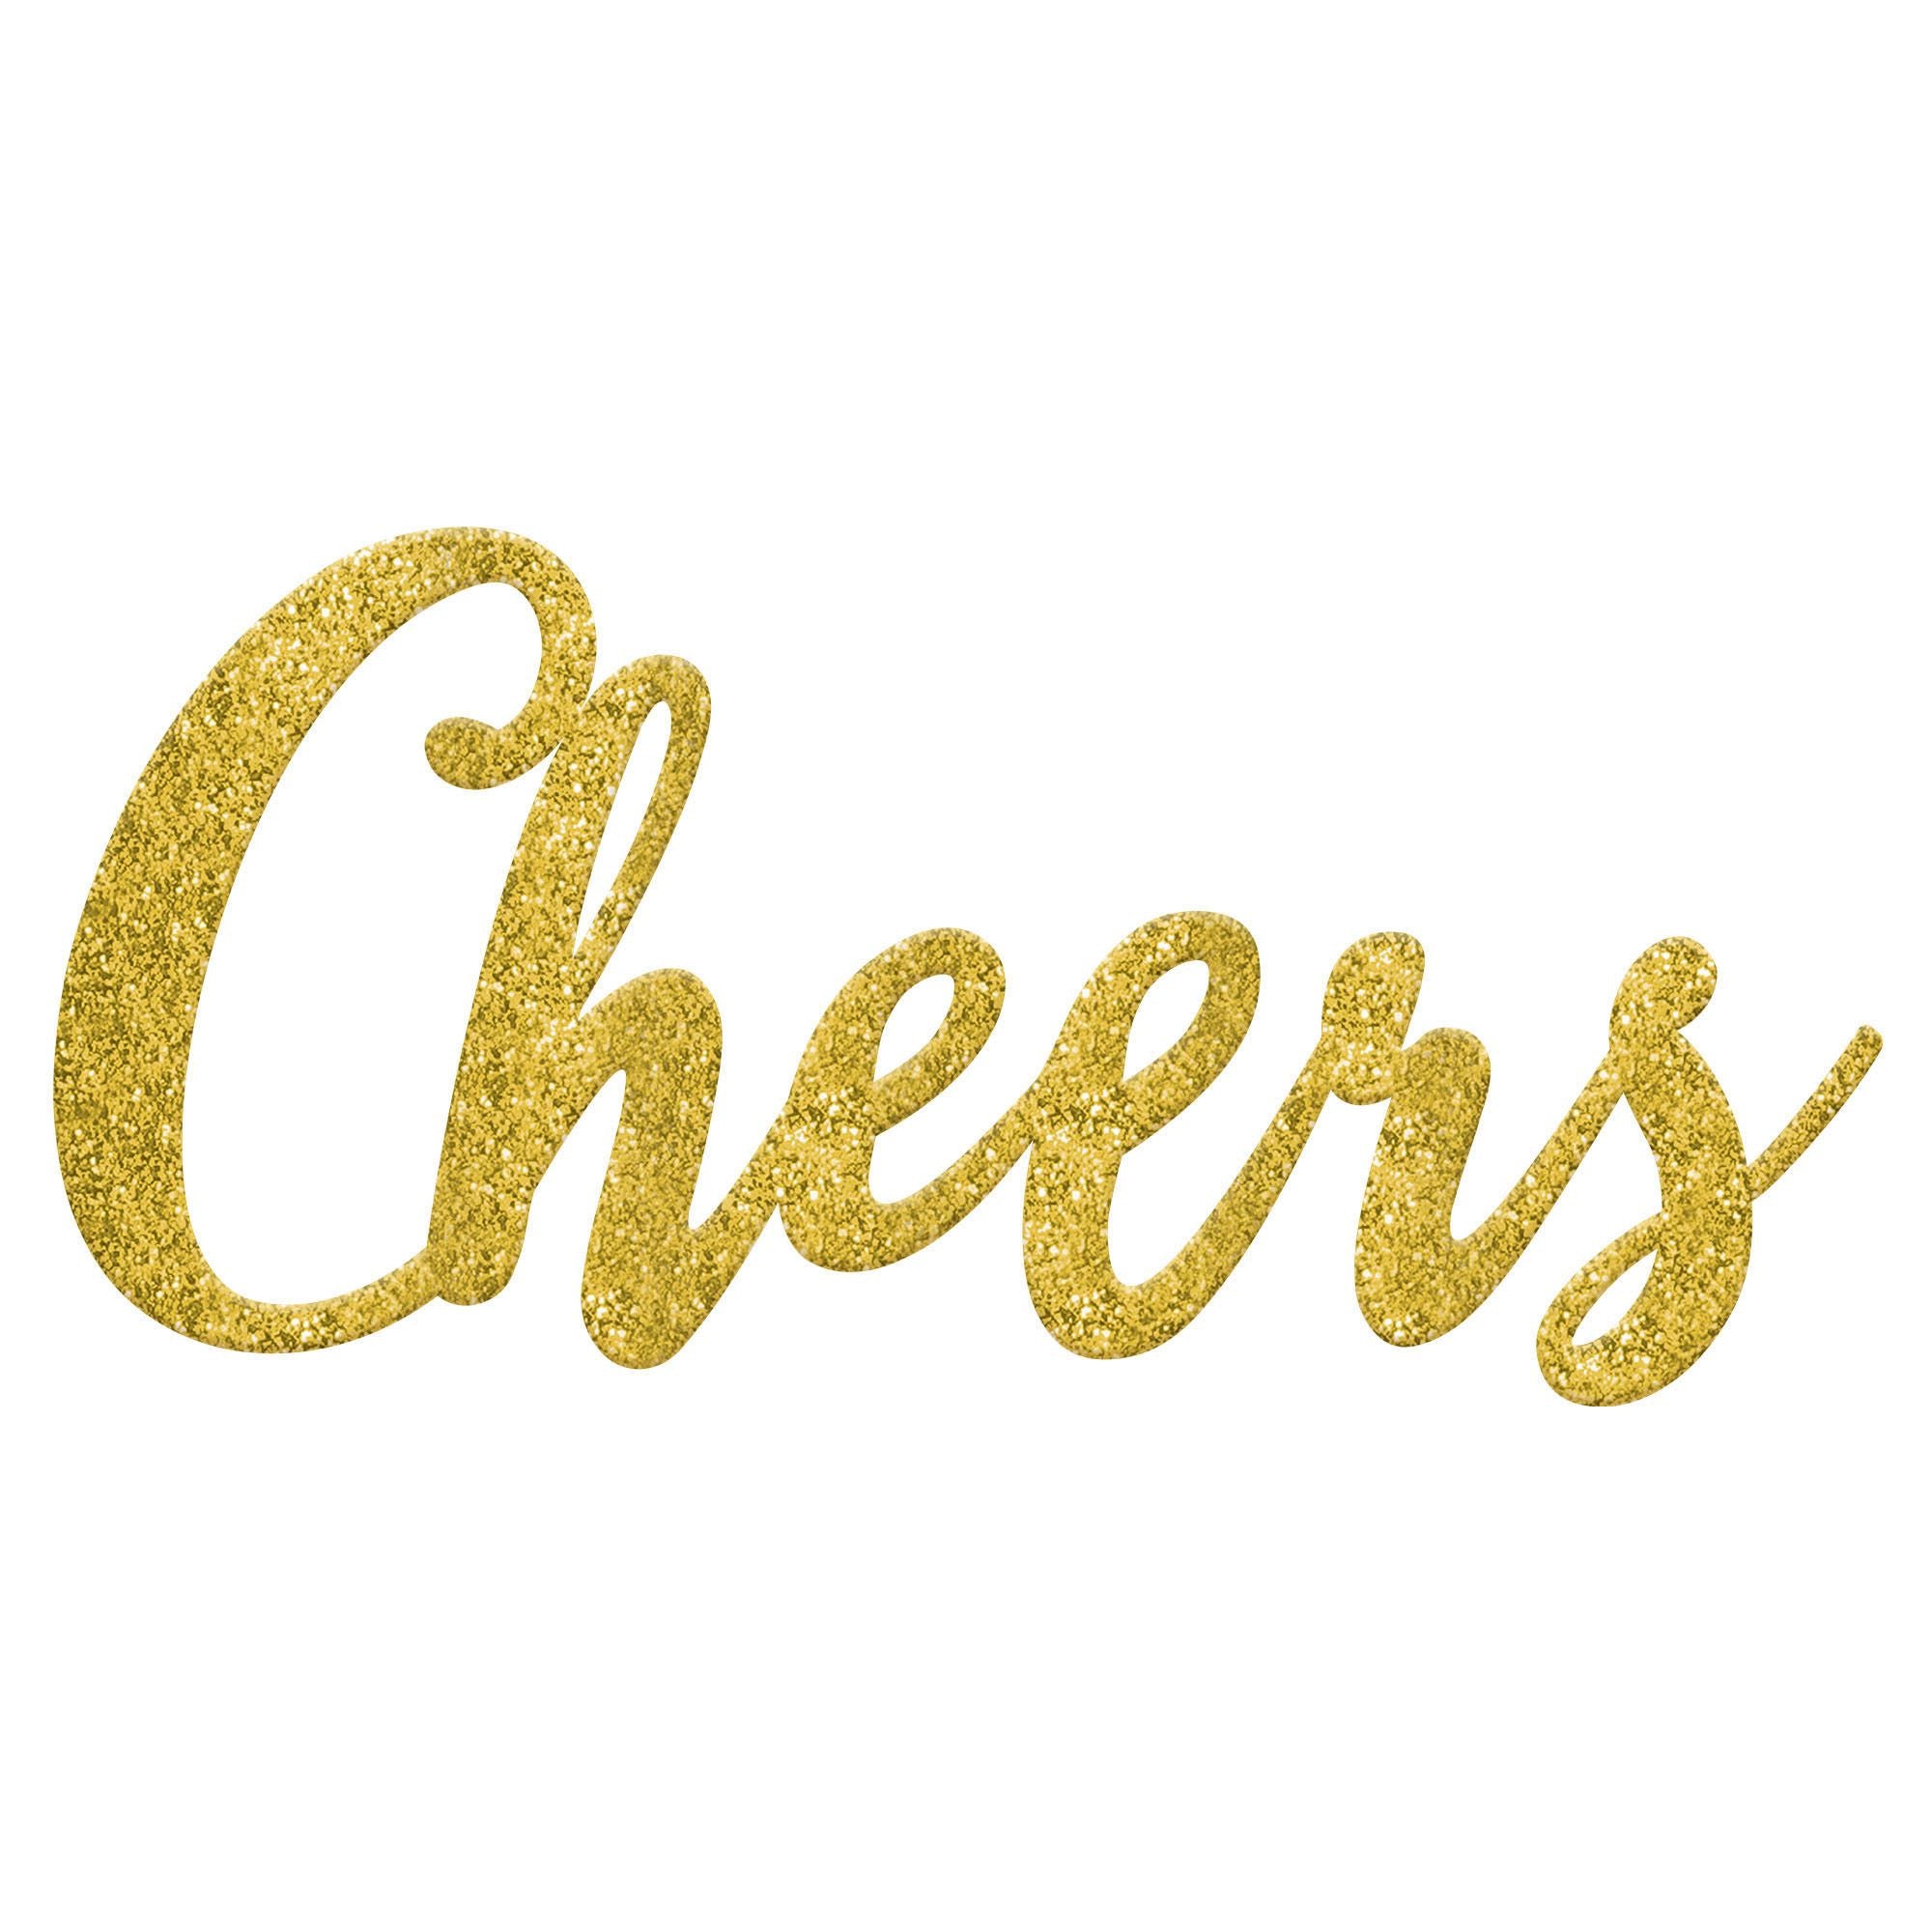 Cheers Giant Photo Prop | New Year's Eve